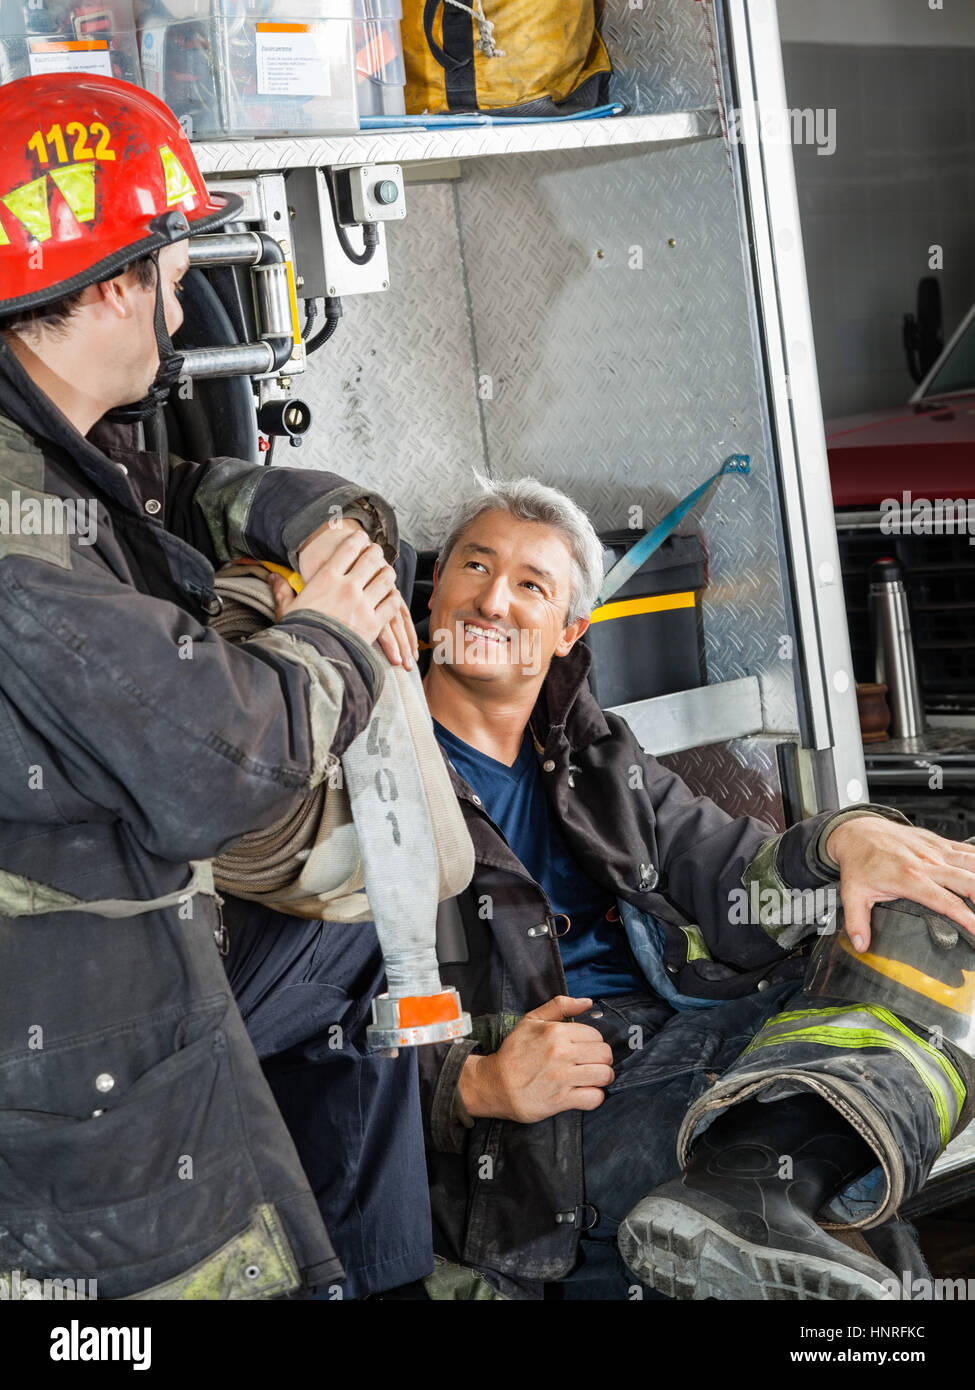 Firefighter Discussing With Colleague On Truck Stock Photo